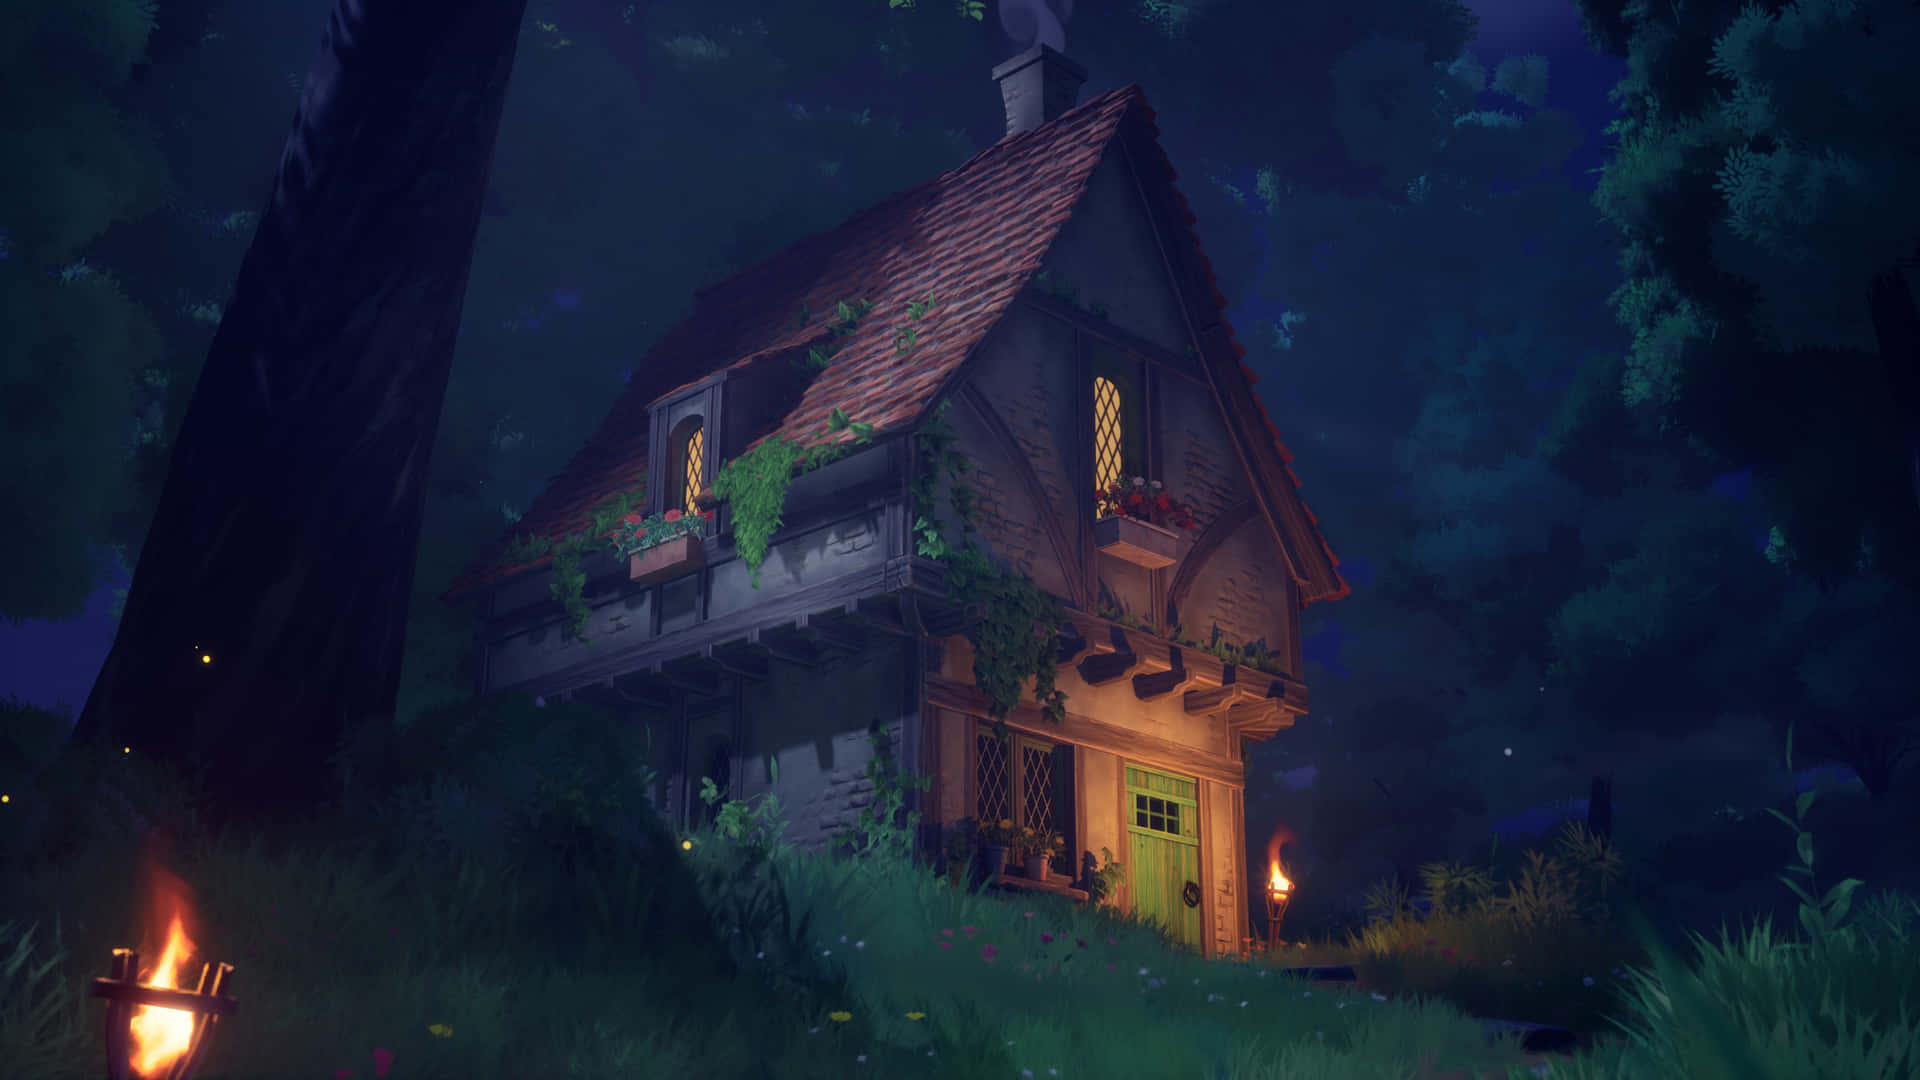 Enchanted Forest Cottage Night Wallpaper